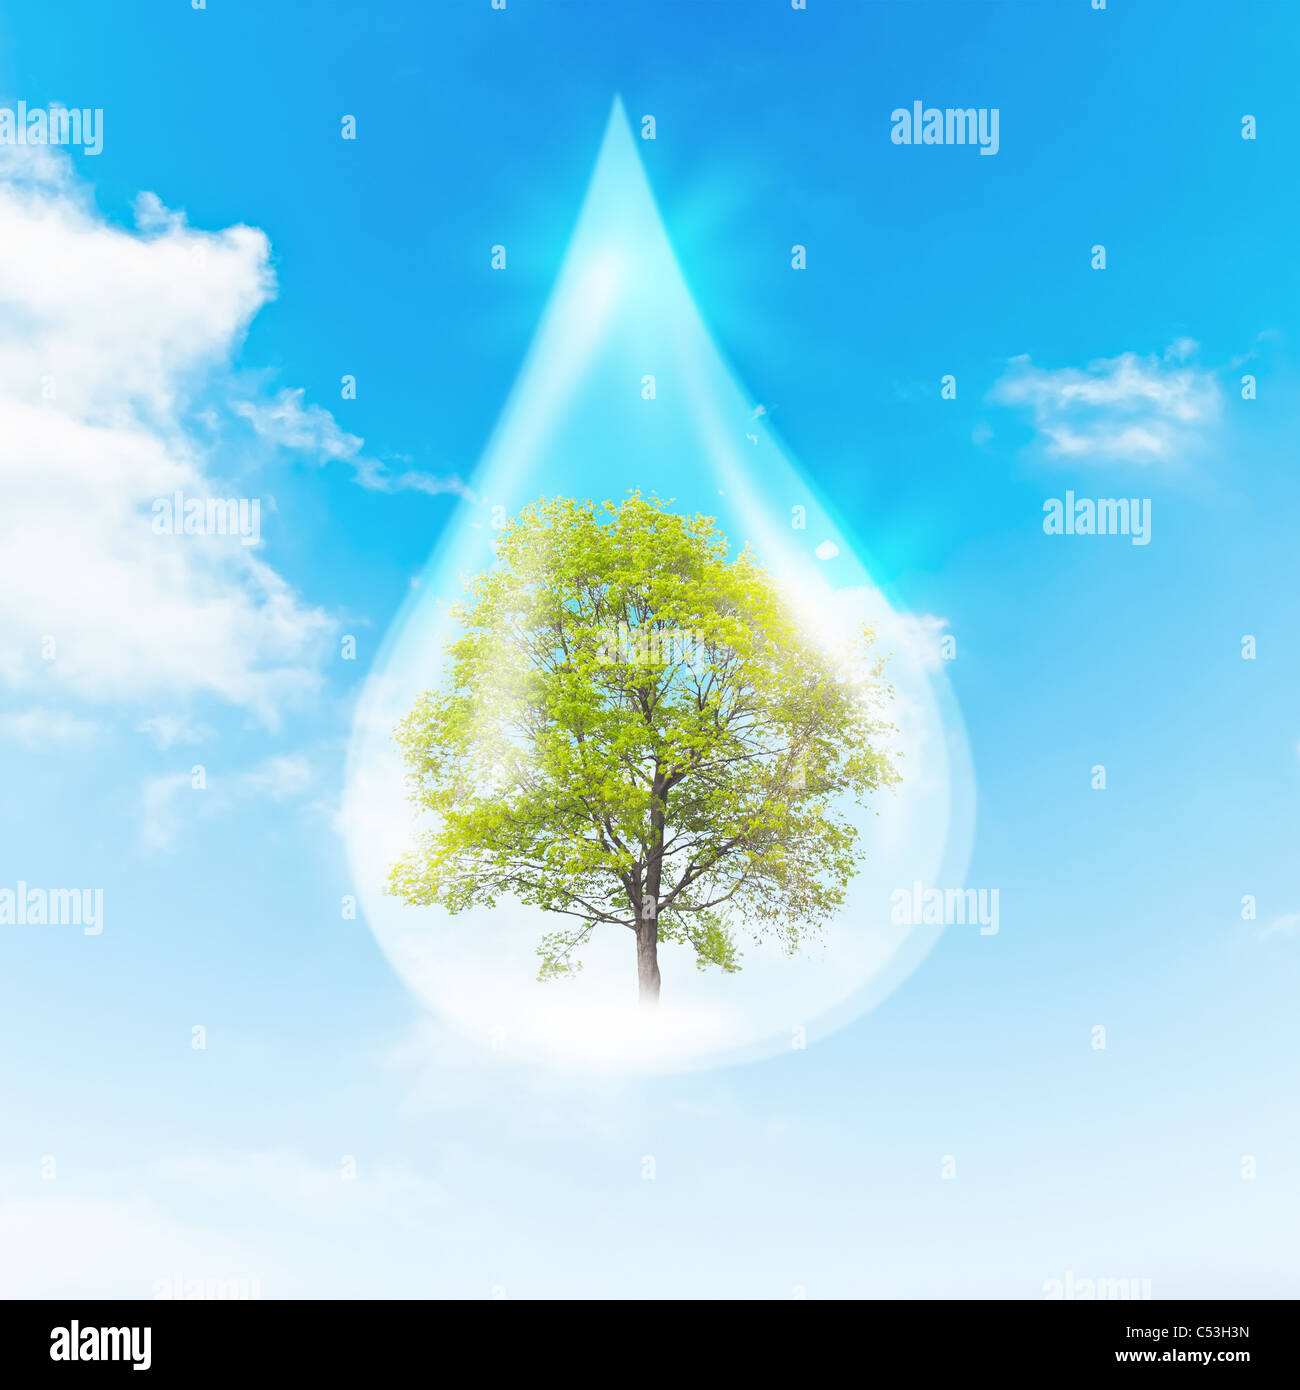 Green Tree inside a clean drop of water as a symbol of environmental protection Stock Photo